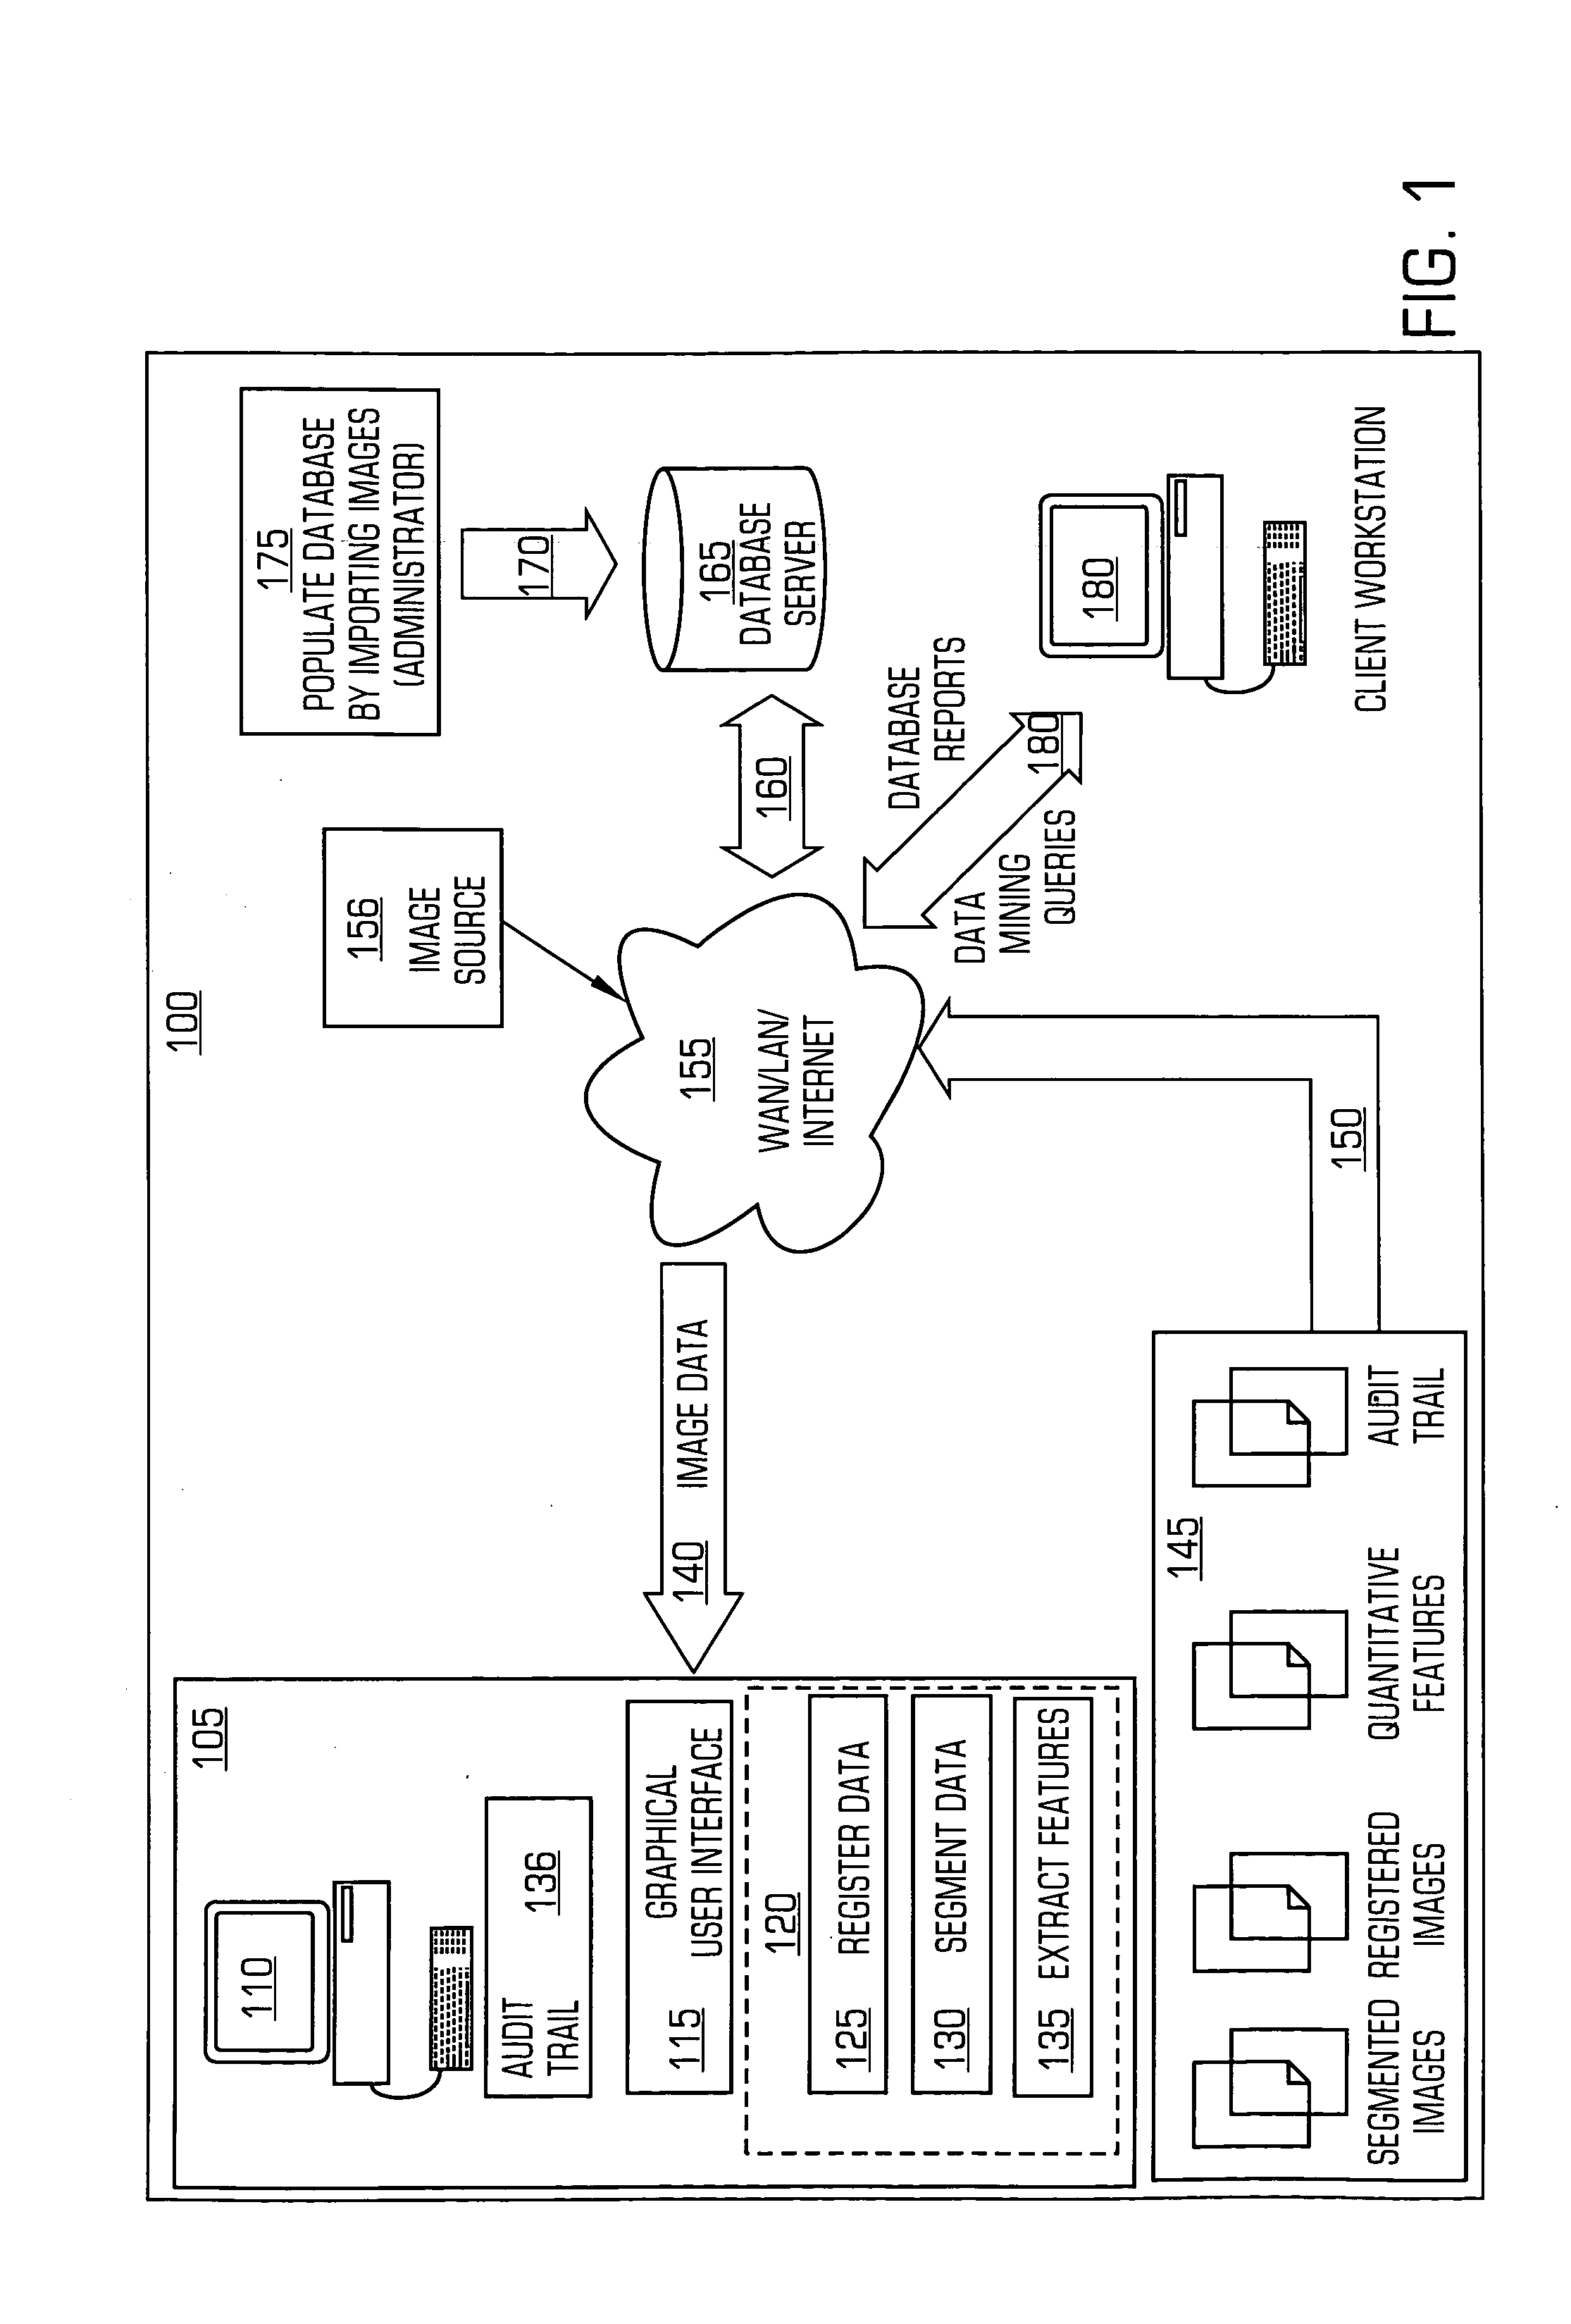 System and method for mining quantitive information from medical images